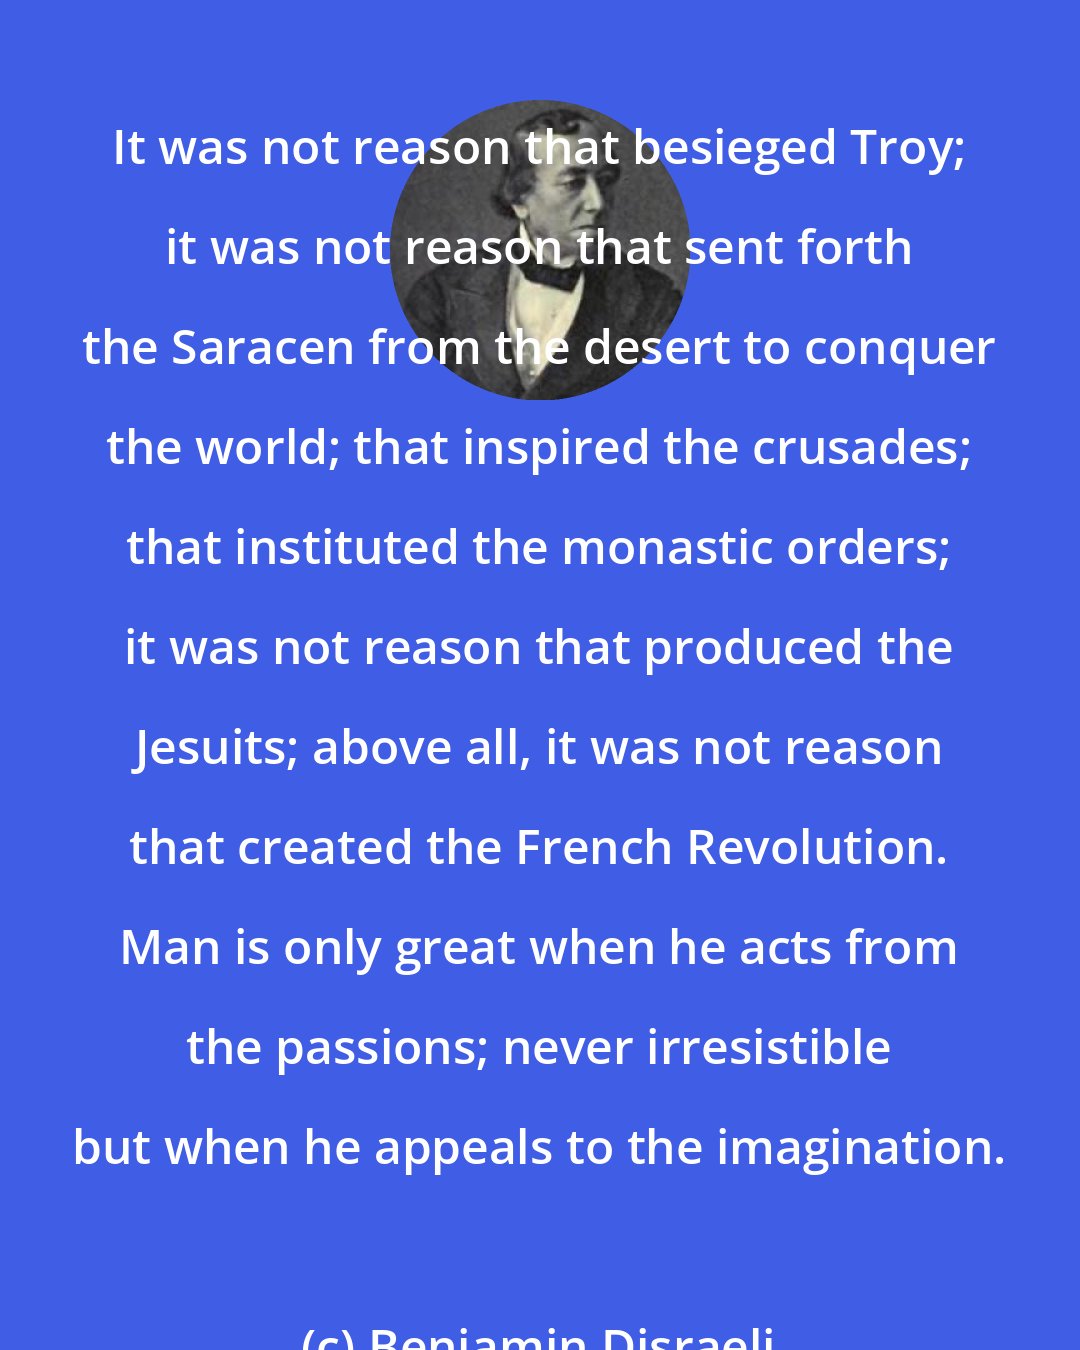 Benjamin Disraeli: It was not reason that besieged Troy; it was not reason that sent forth the Saracen from the desert to conquer the world; that inspired the crusades; that instituted the monastic orders; it was not reason that produced the Jesuits; above all, it was not reason that created the French Revolution. Man is only great when he acts from the passions; never irresistible but when he appeals to the imagination.